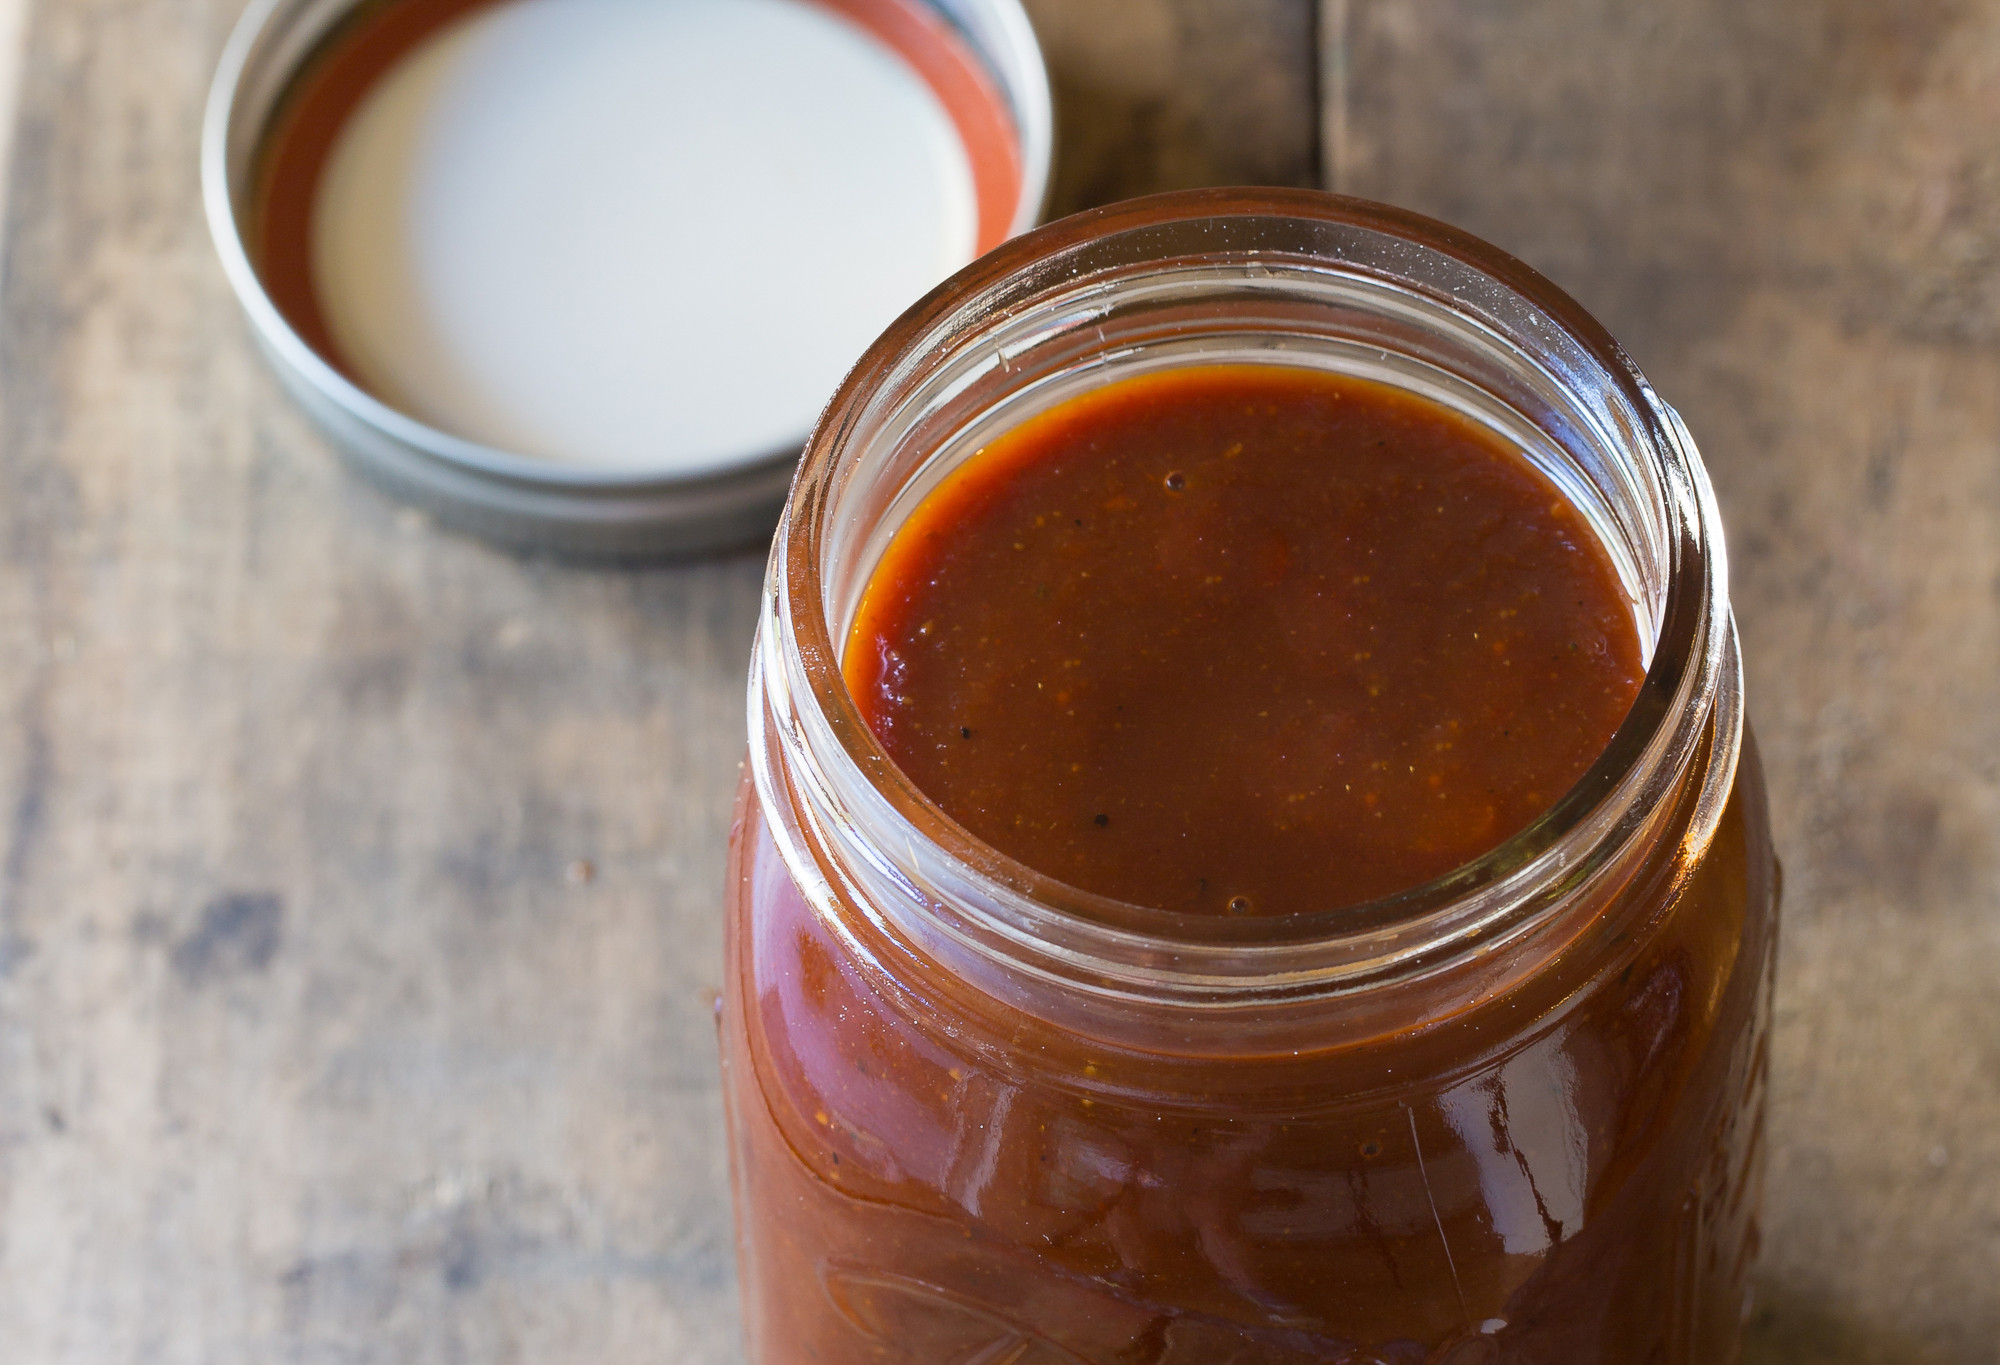 How To Make Bbq Sauce
 How to Make Barbecue Sauce